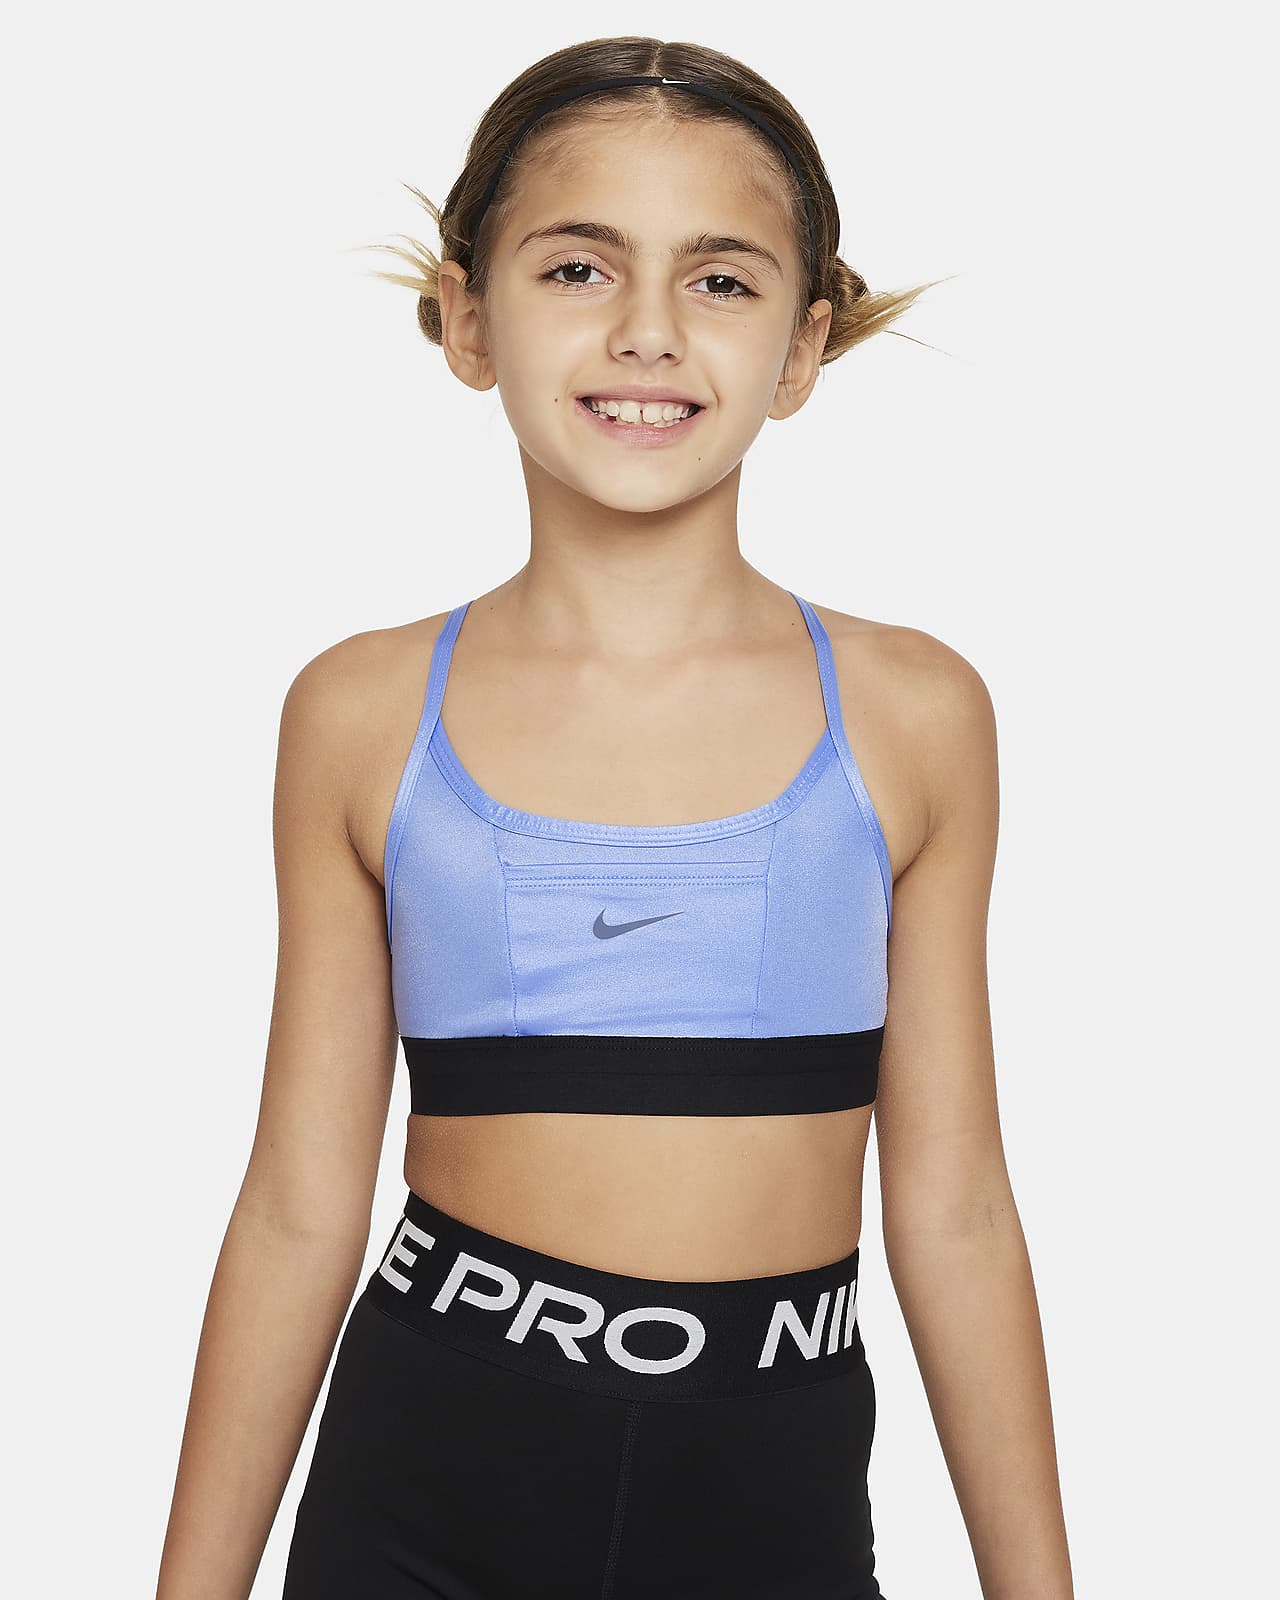 When to Buy Her First Sports Bra. Nike CA